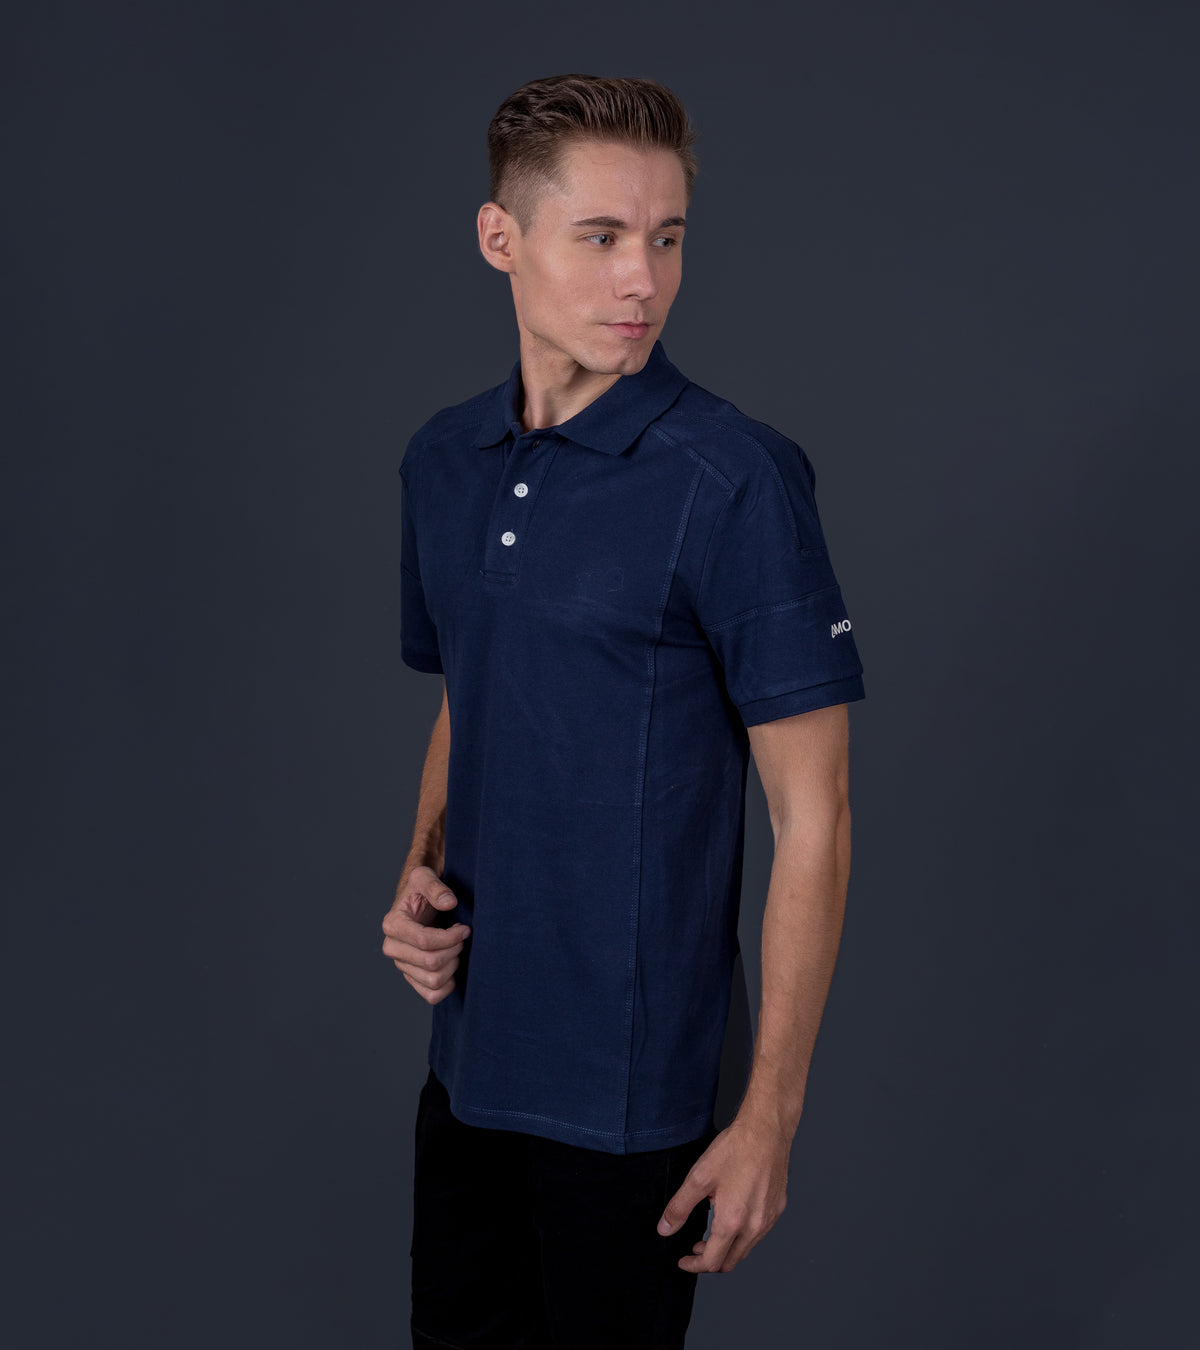 Nomad’s Polo Tee